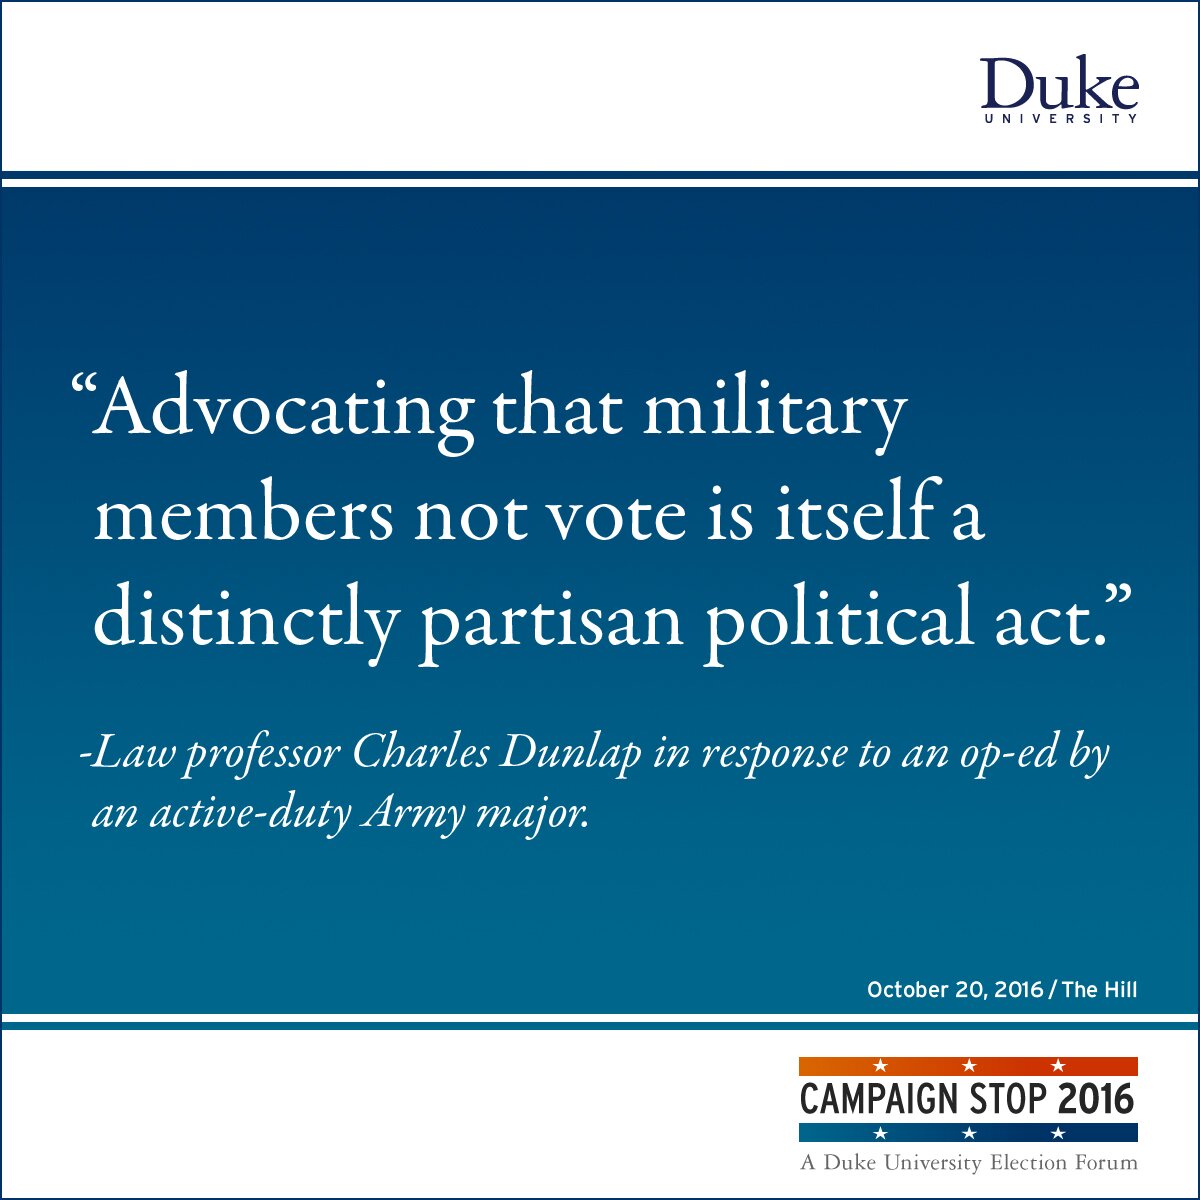 “Advocating that military members not vote is itself a distinctly partisan political act.” -Law professor Charles Dunlap in response to an op-ed by an active-duty Army major.